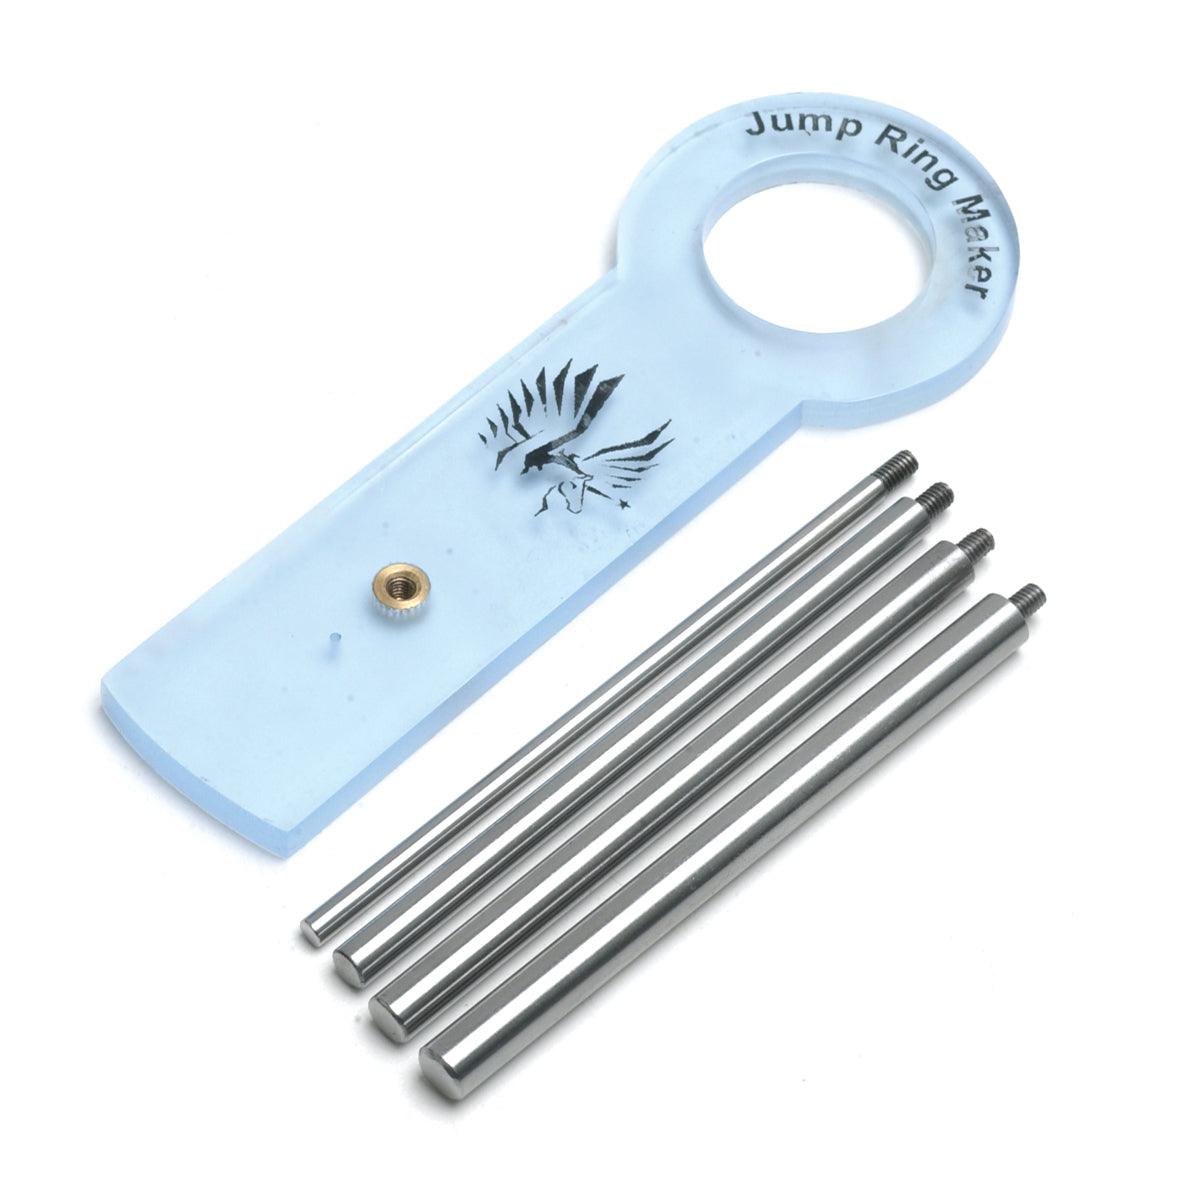 Jump Ring Maker with Cutter and 20 Mandrels Sizes for Gold & Silver Jewelry  Tool